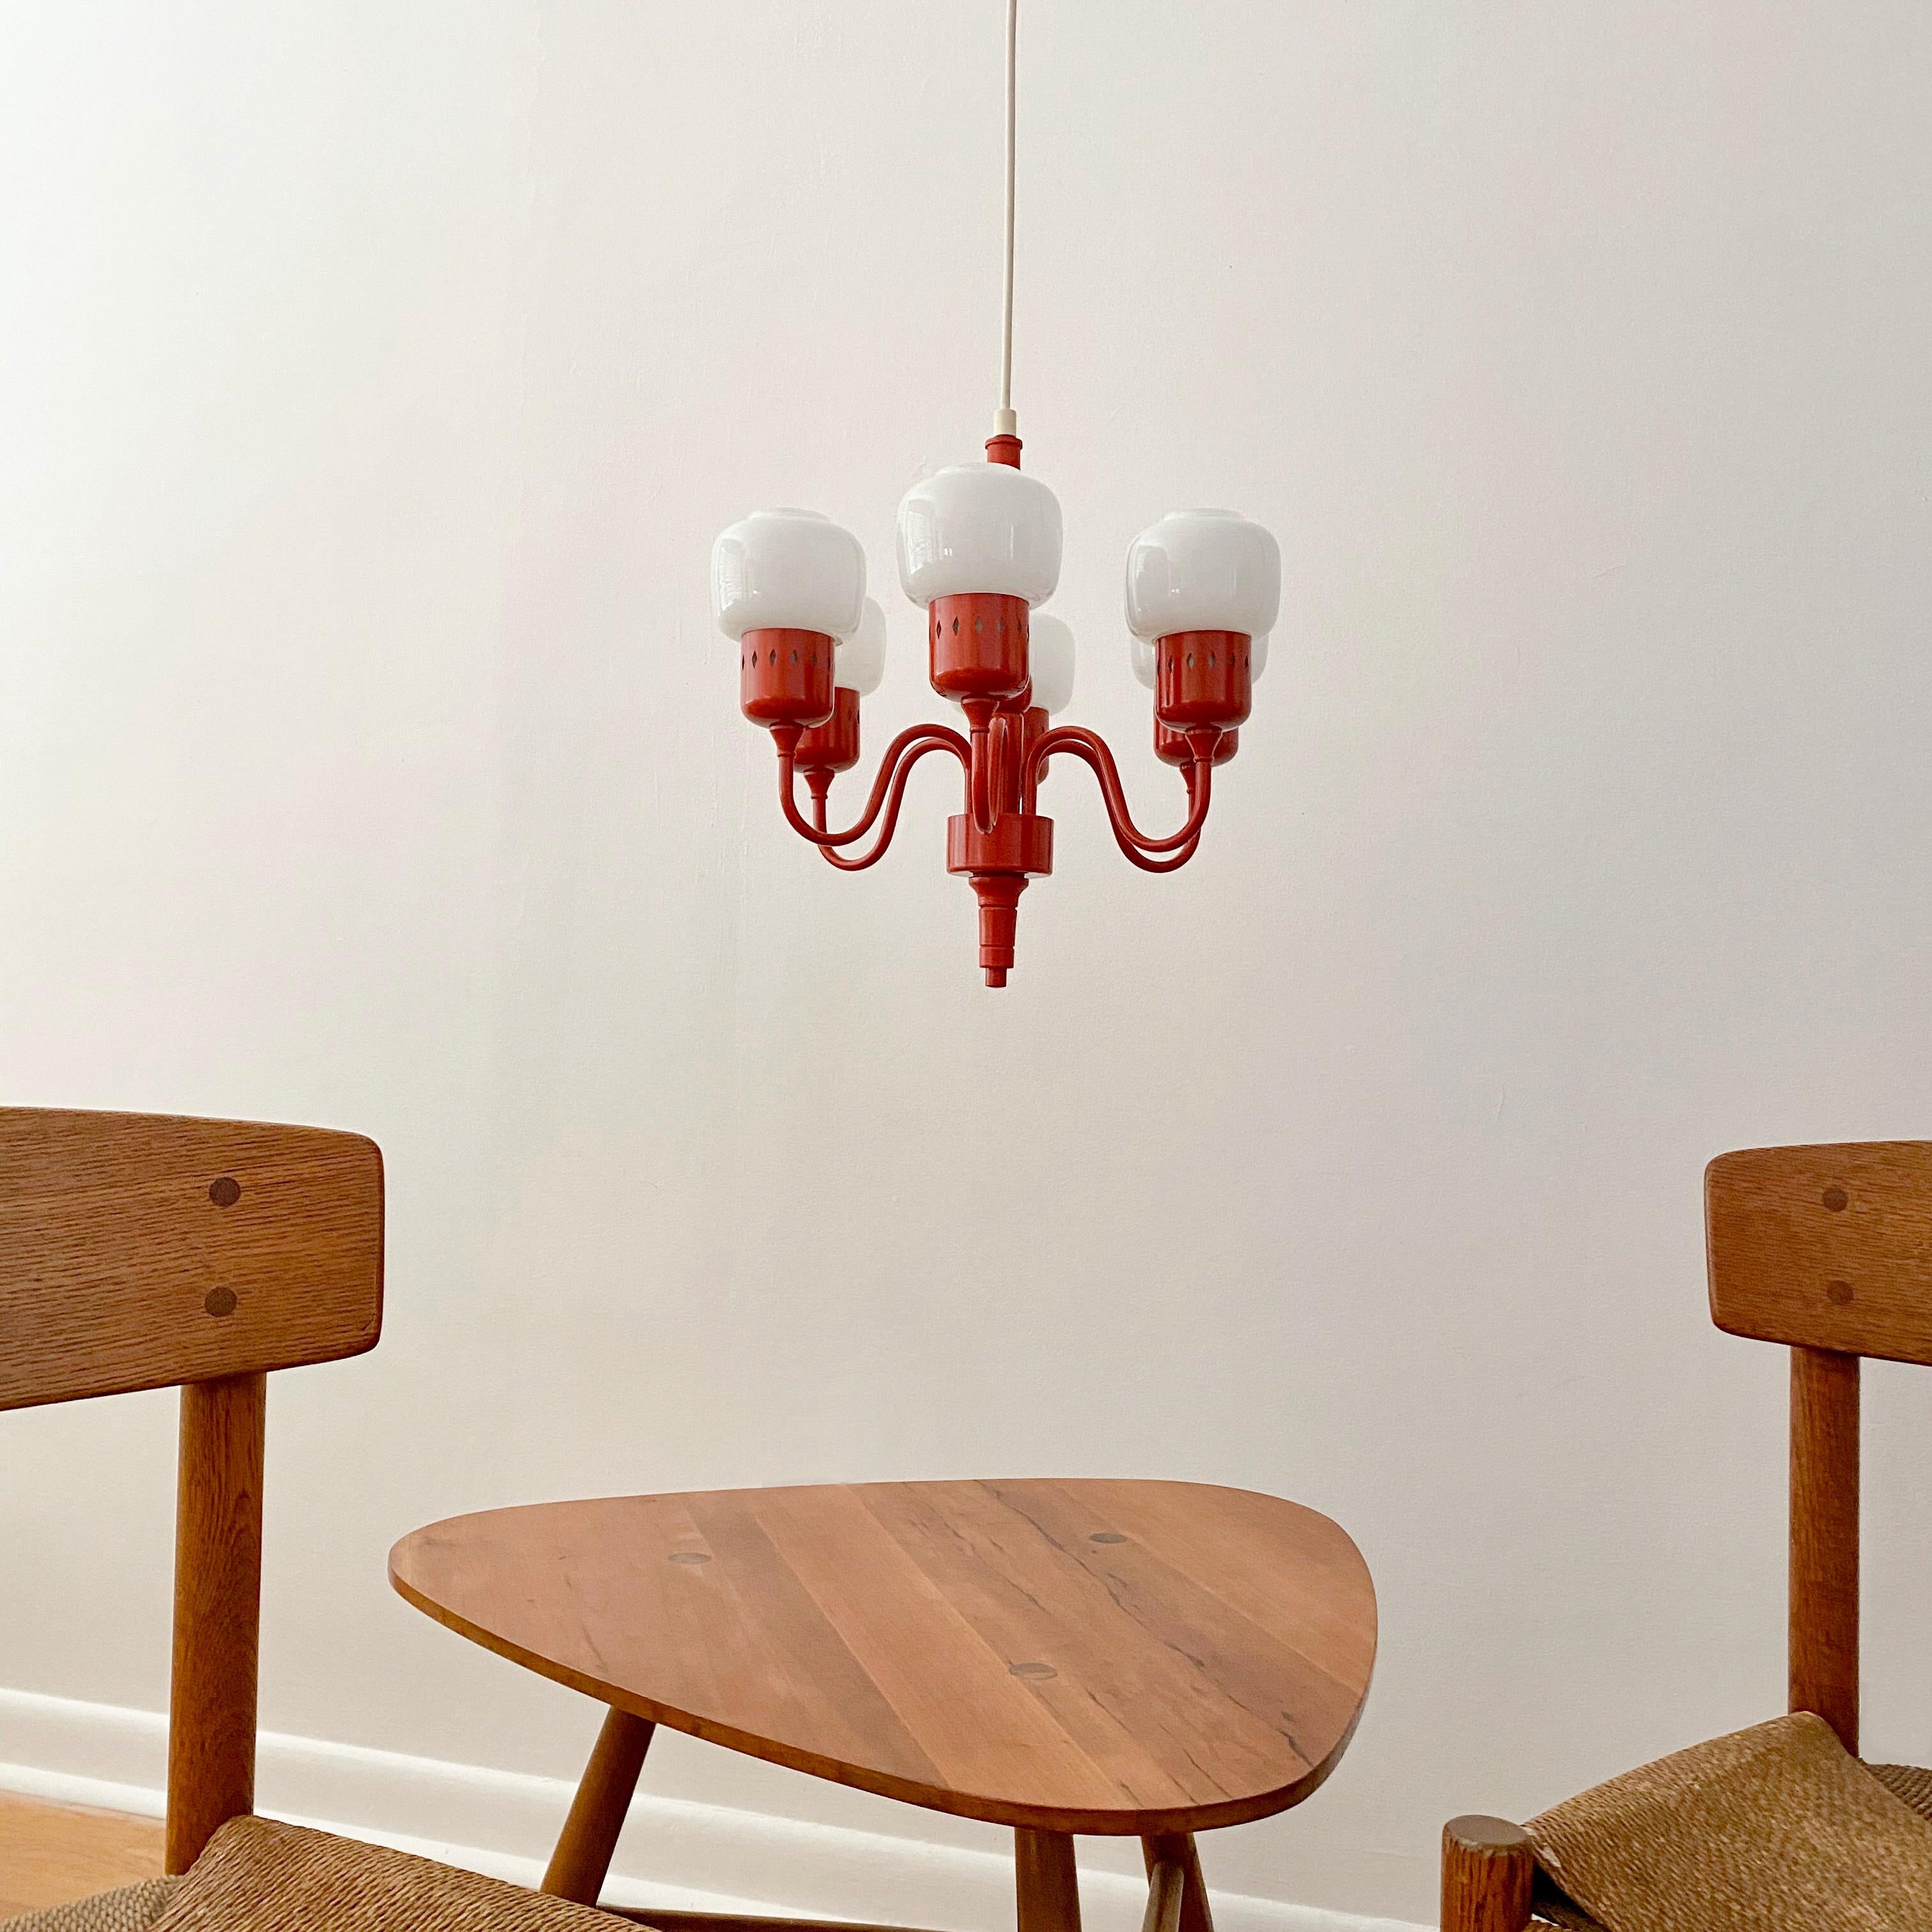 A small chandelier designed by Hans - Agne Jakobsson for his company Hans - Agne Jakobsson AB in Markaryd, Sweden. The chandelier was designed in 1964, called the 